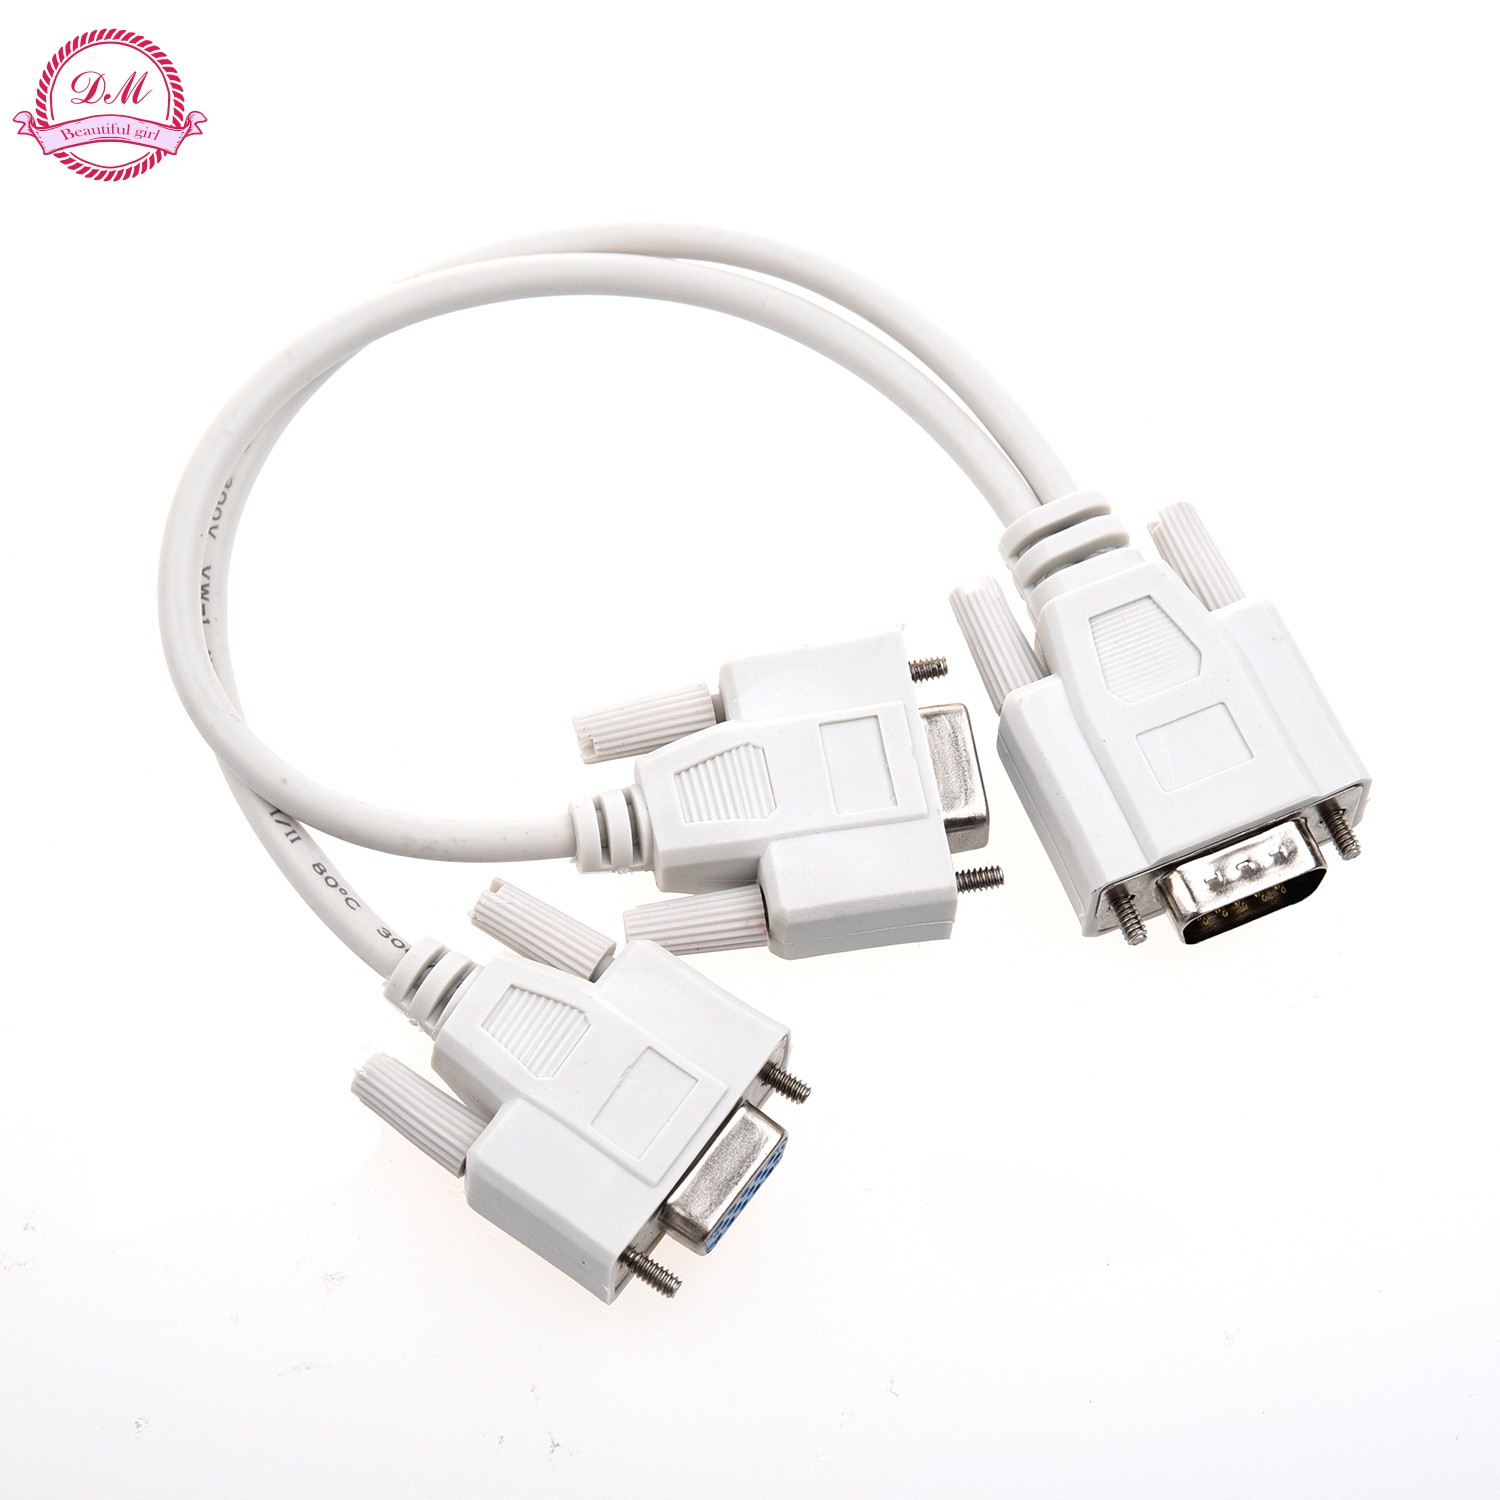 8-pcs New 1 Pc To 2 Monitors Cable For Vga Video